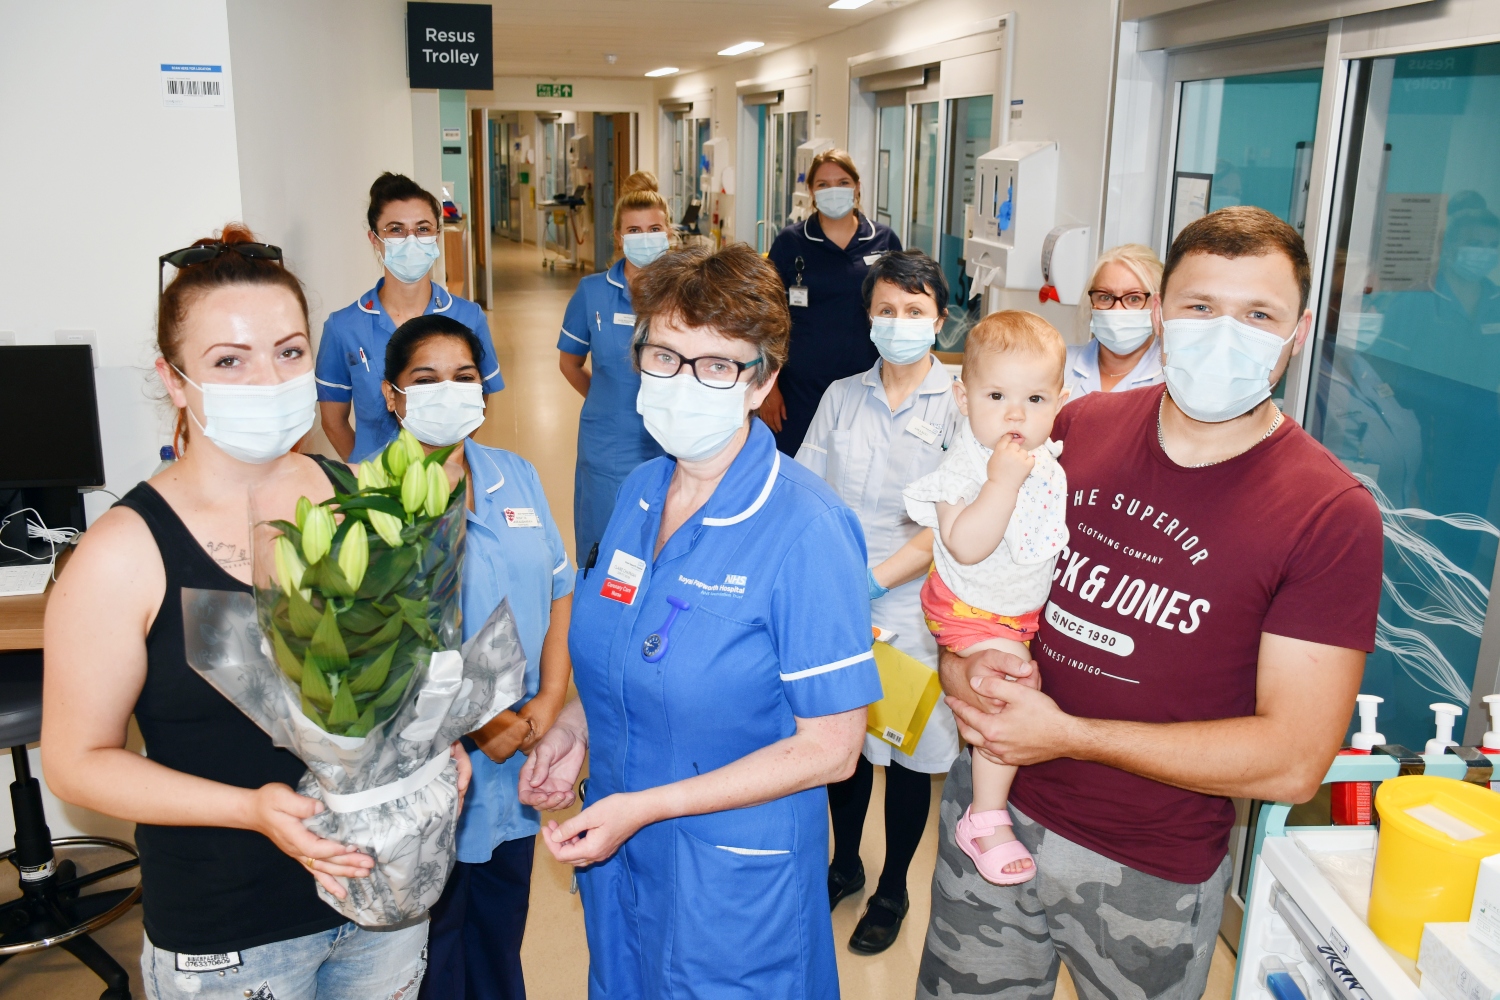 Claire in a blue nurse uniform being presented with a pot of flowers by Monika. Other nurses stand in the background of the ward corridor.